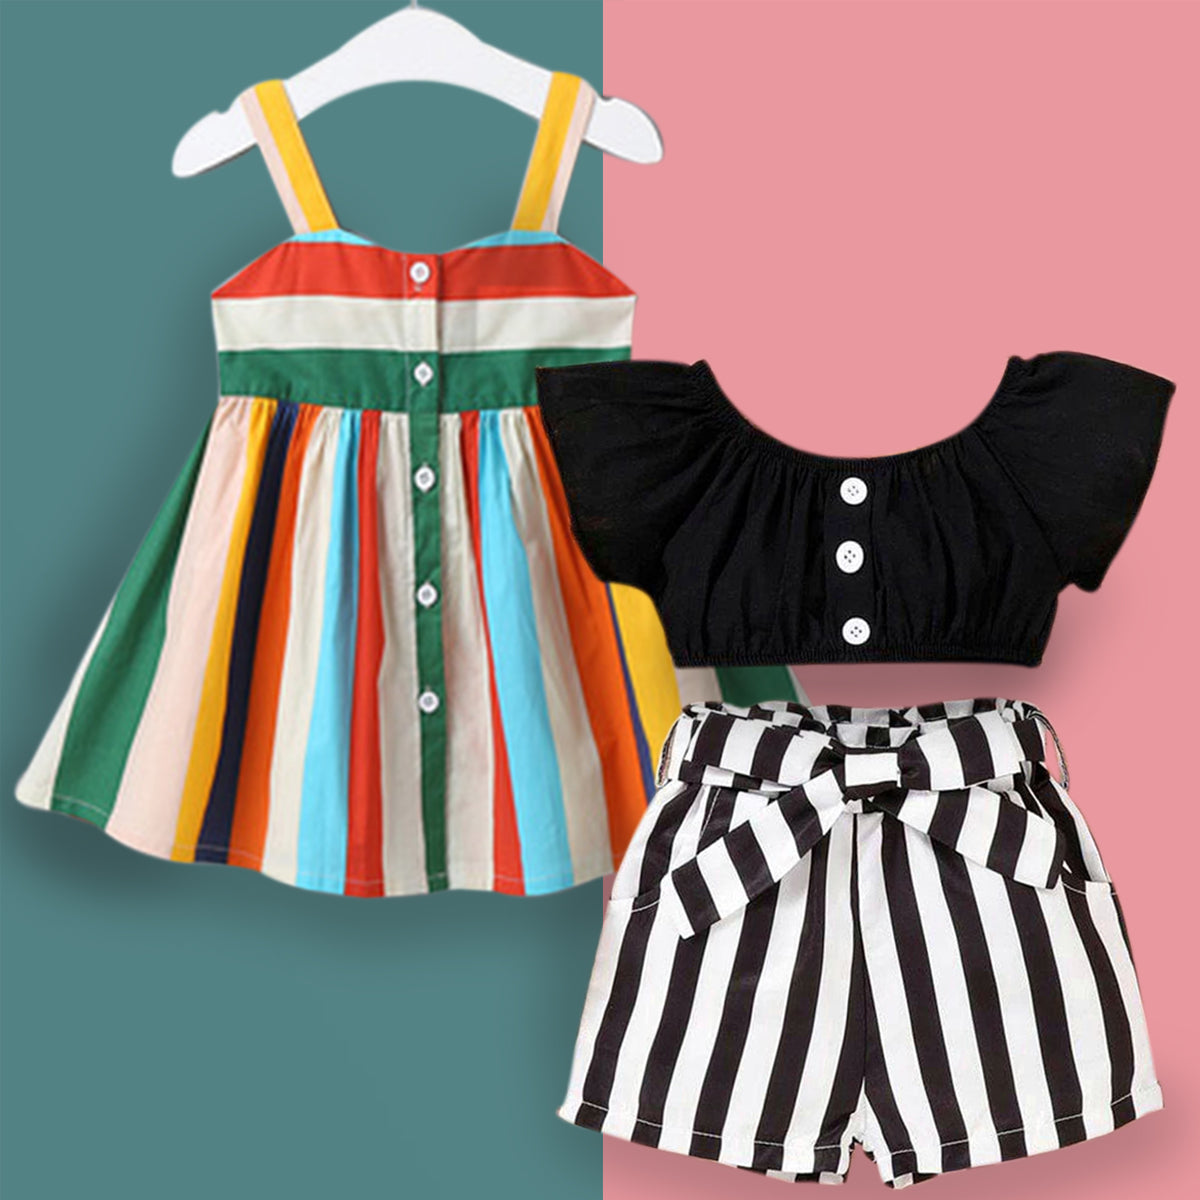 BabyGirl's Multicolor Strip Tunic Dress & Black Strip Top Sleeveless And Shorts (Combo Pack Of 2) for Kids.